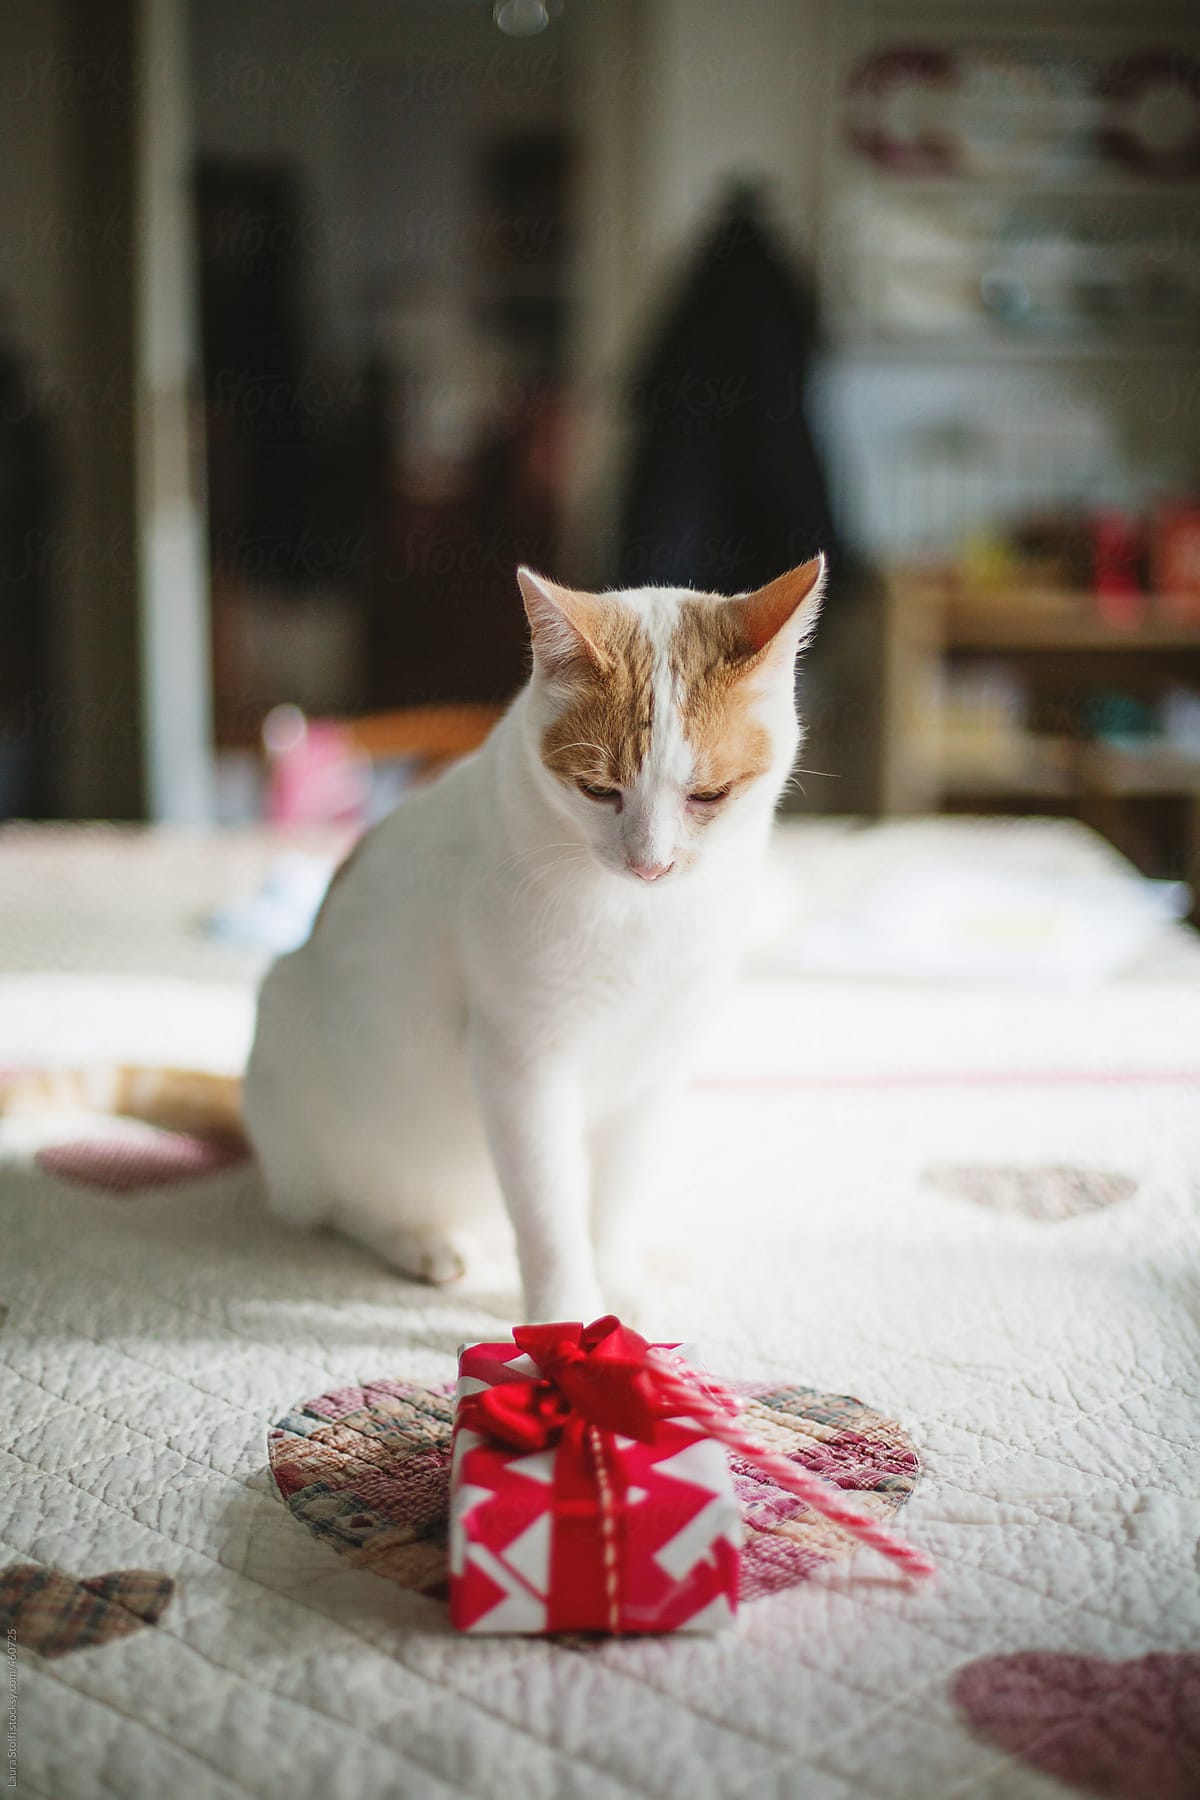 White and ginger cat looking at wrapped present on kitchen table